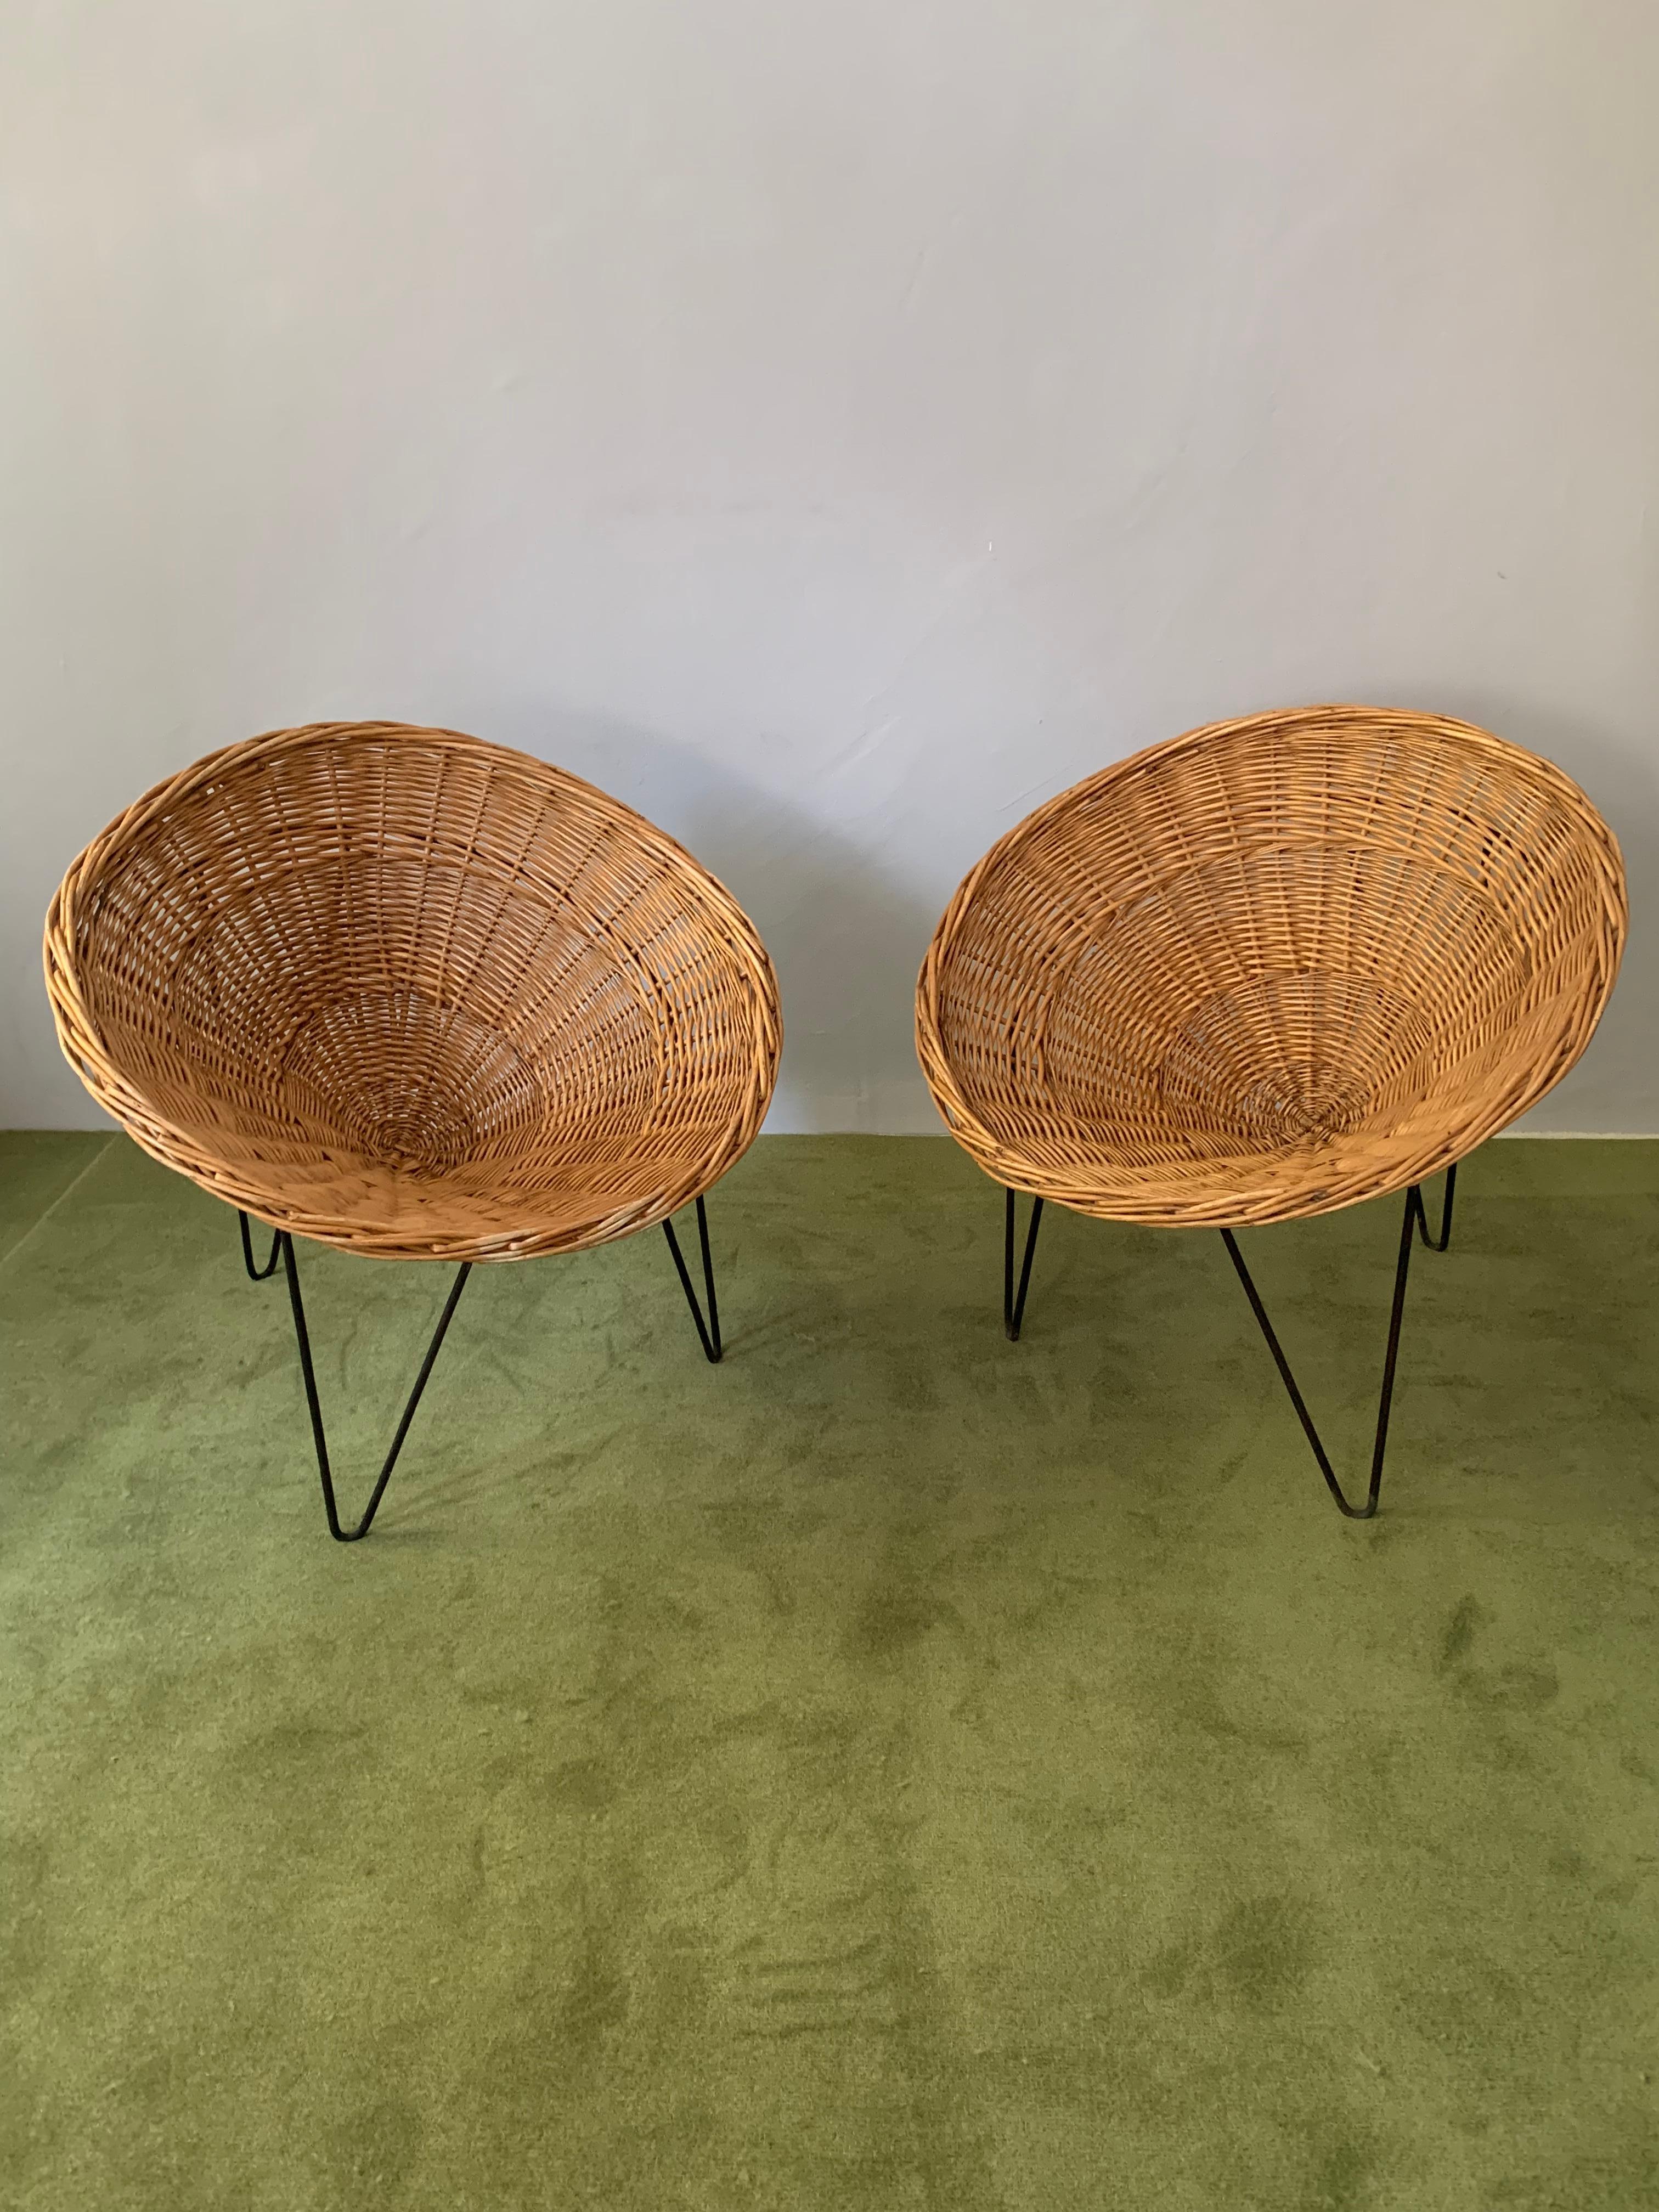 Rare original edition of a pair of Cône armchairs by Terence Conran for Conran Furniture from 1950's. The two chairs are in very good condition; the willow baskets have no breakage and the black metal tripod steel rod frames remained at their